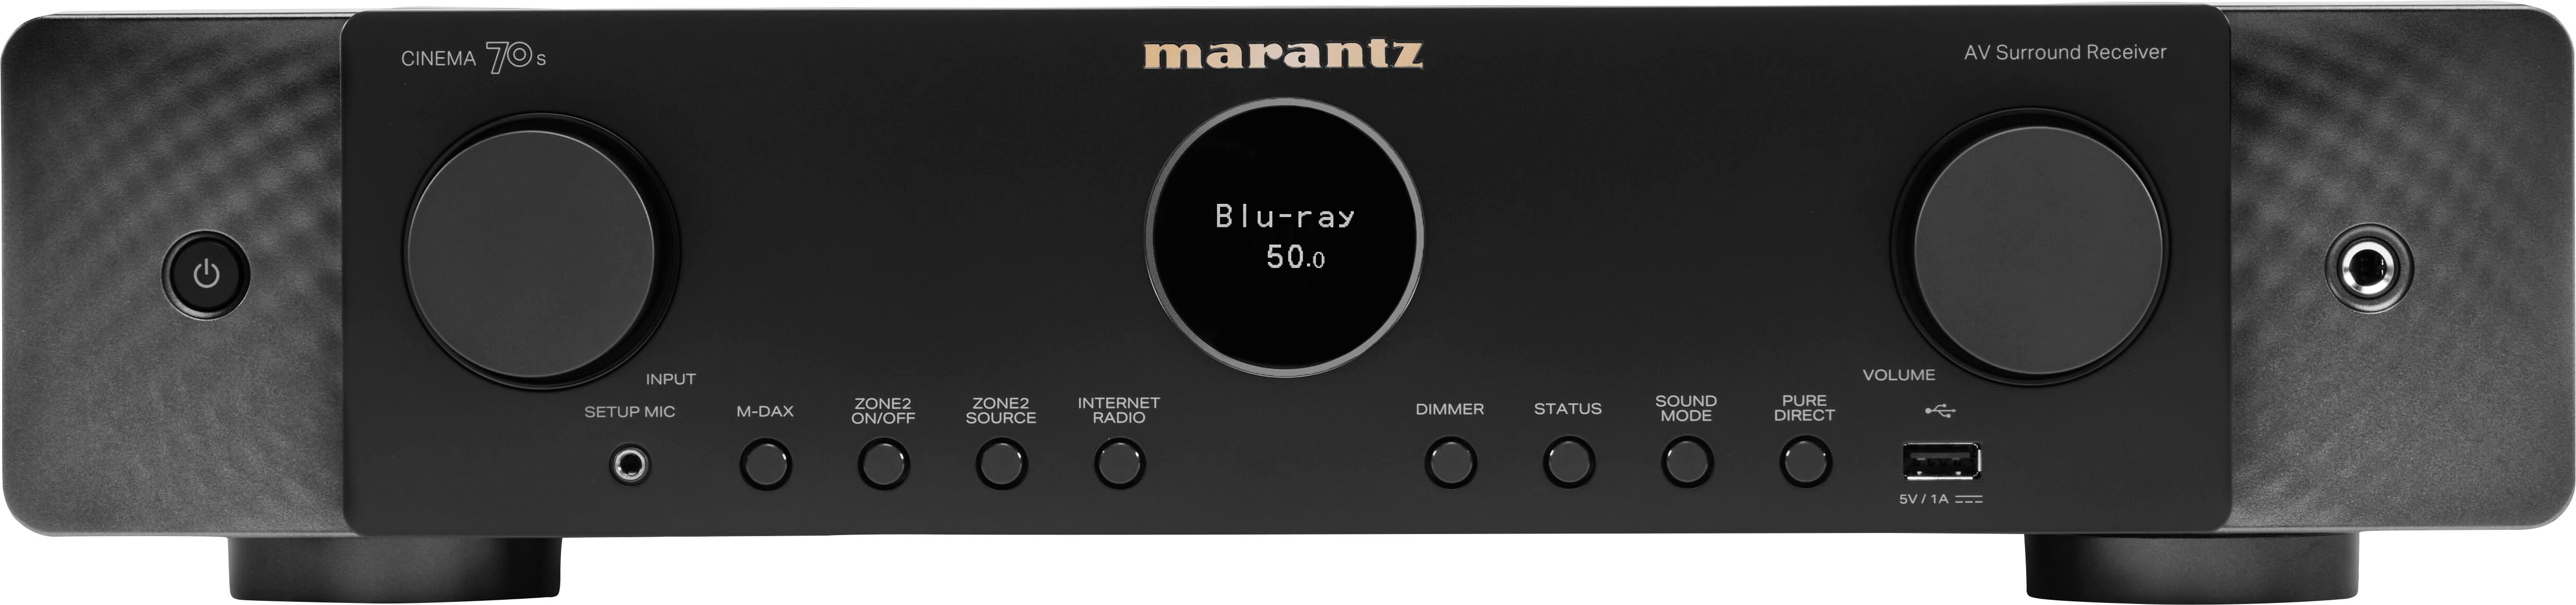 Specificity Therapy Autonomous Marantz Cinema 70S 8K Ultra HD 7.2 Channel (50W X 7) AV Receiver 2022 Model  Built for Movies, Gaming, & Music Streaming Black CINEMA70S - Best Buy